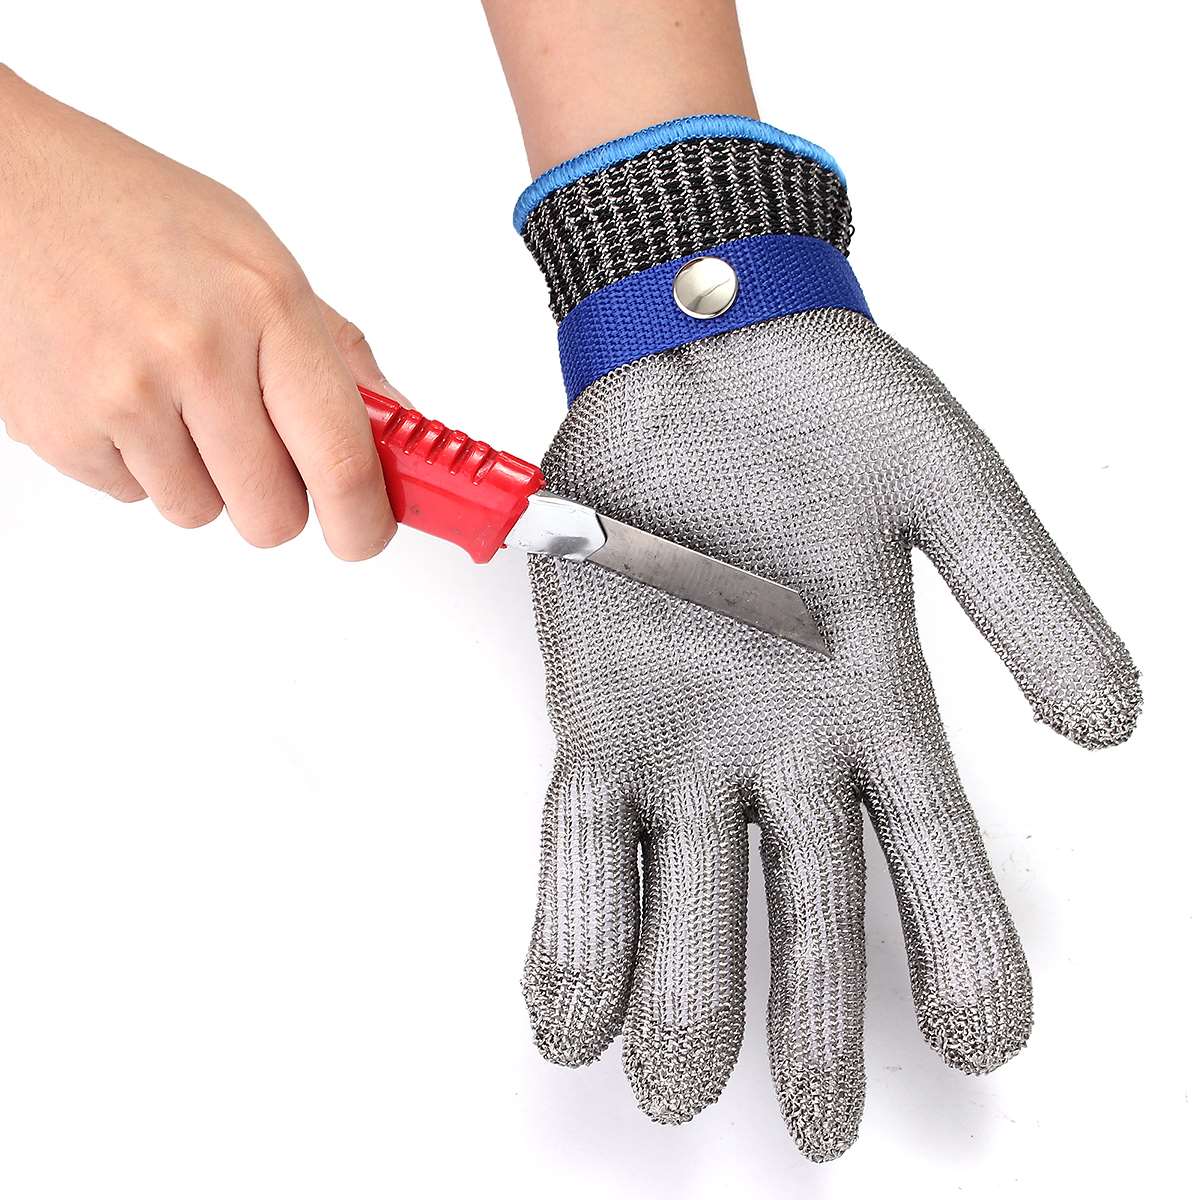 Size S Safety Cut Proof Stab Resistant Stainless Steel Wire Metal Mesh Glove High Performance Level 5 Protection